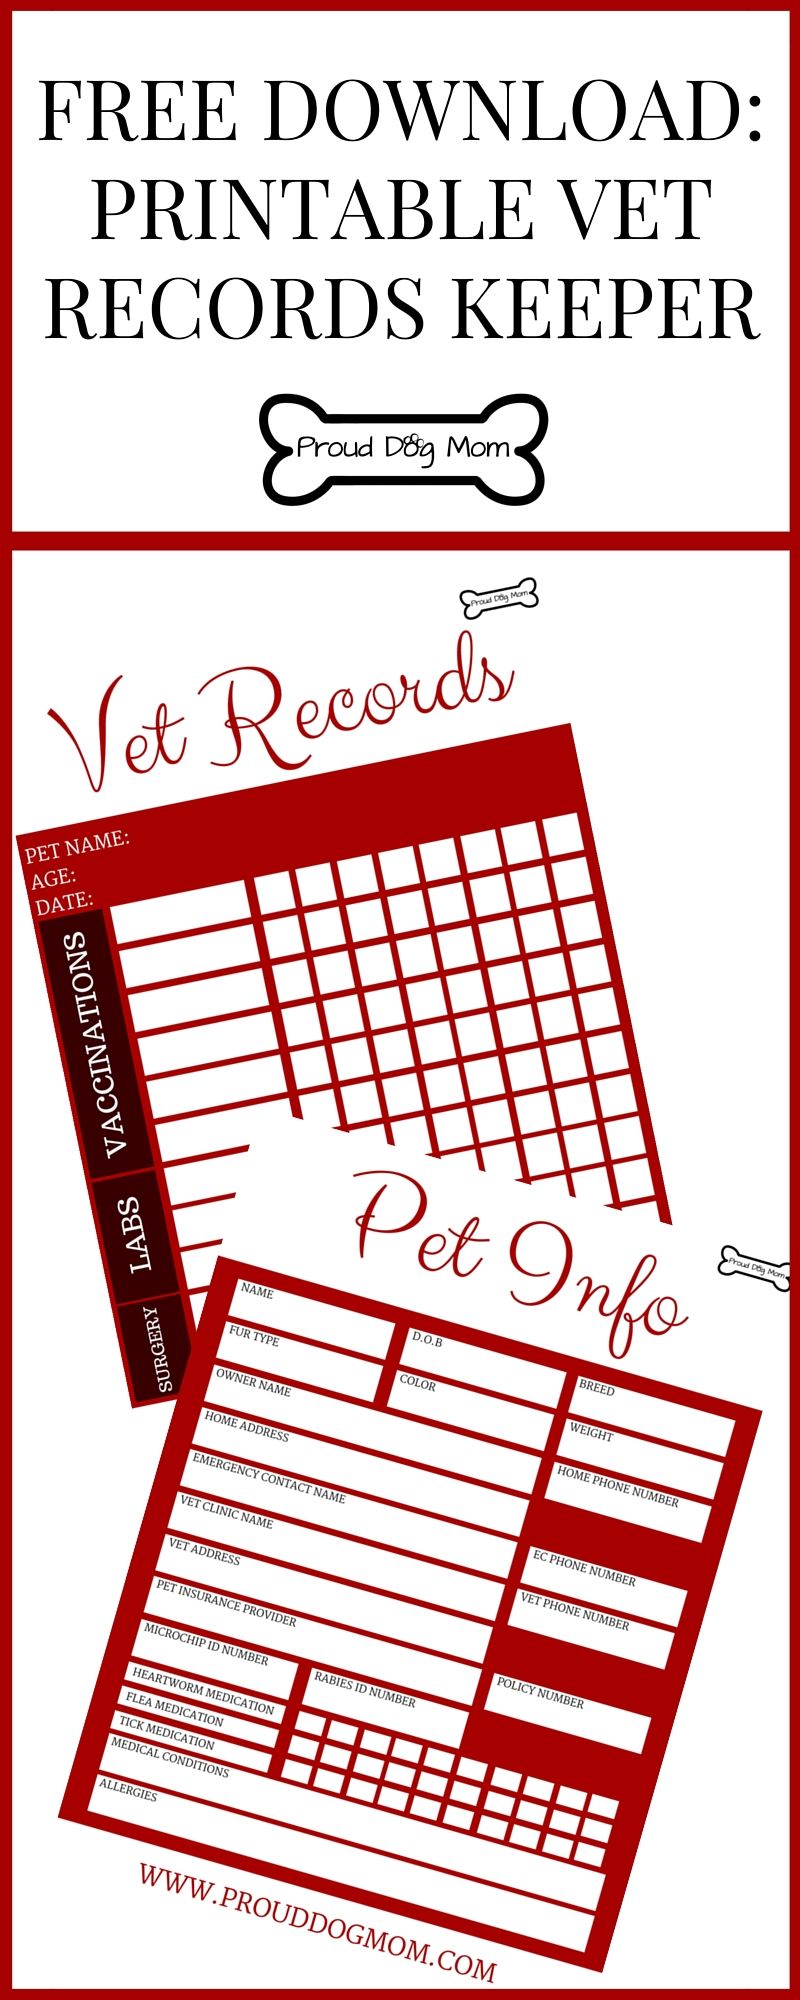 Image result for printable puppy shot record form | Frenchies 